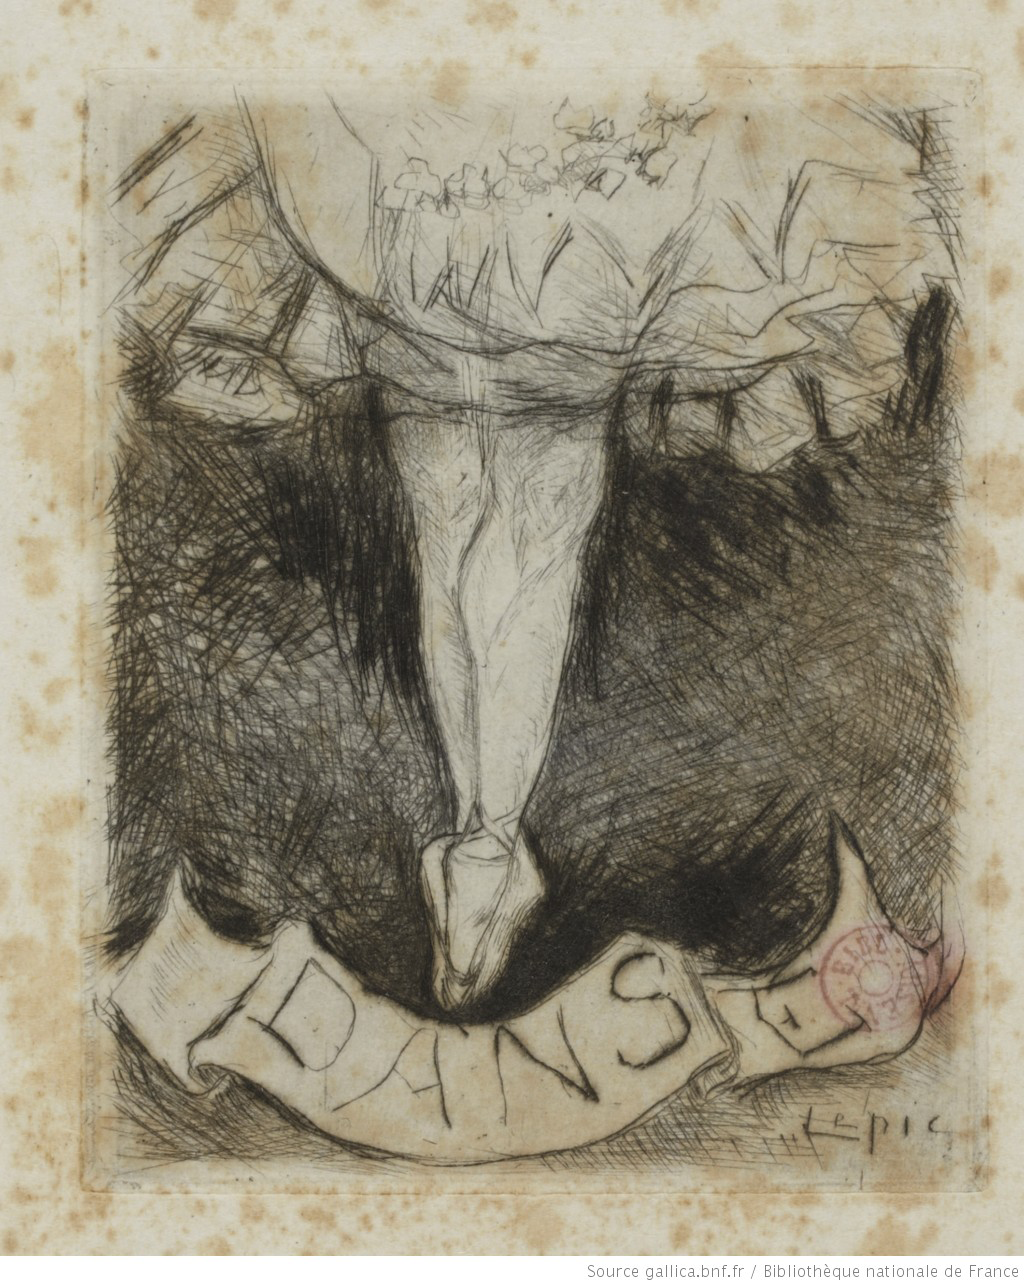 A sketch of two legs under a dress or tutu that are leaning against each other, Under it is a banner with the word &ldquo;DANSE&rdquo; written.